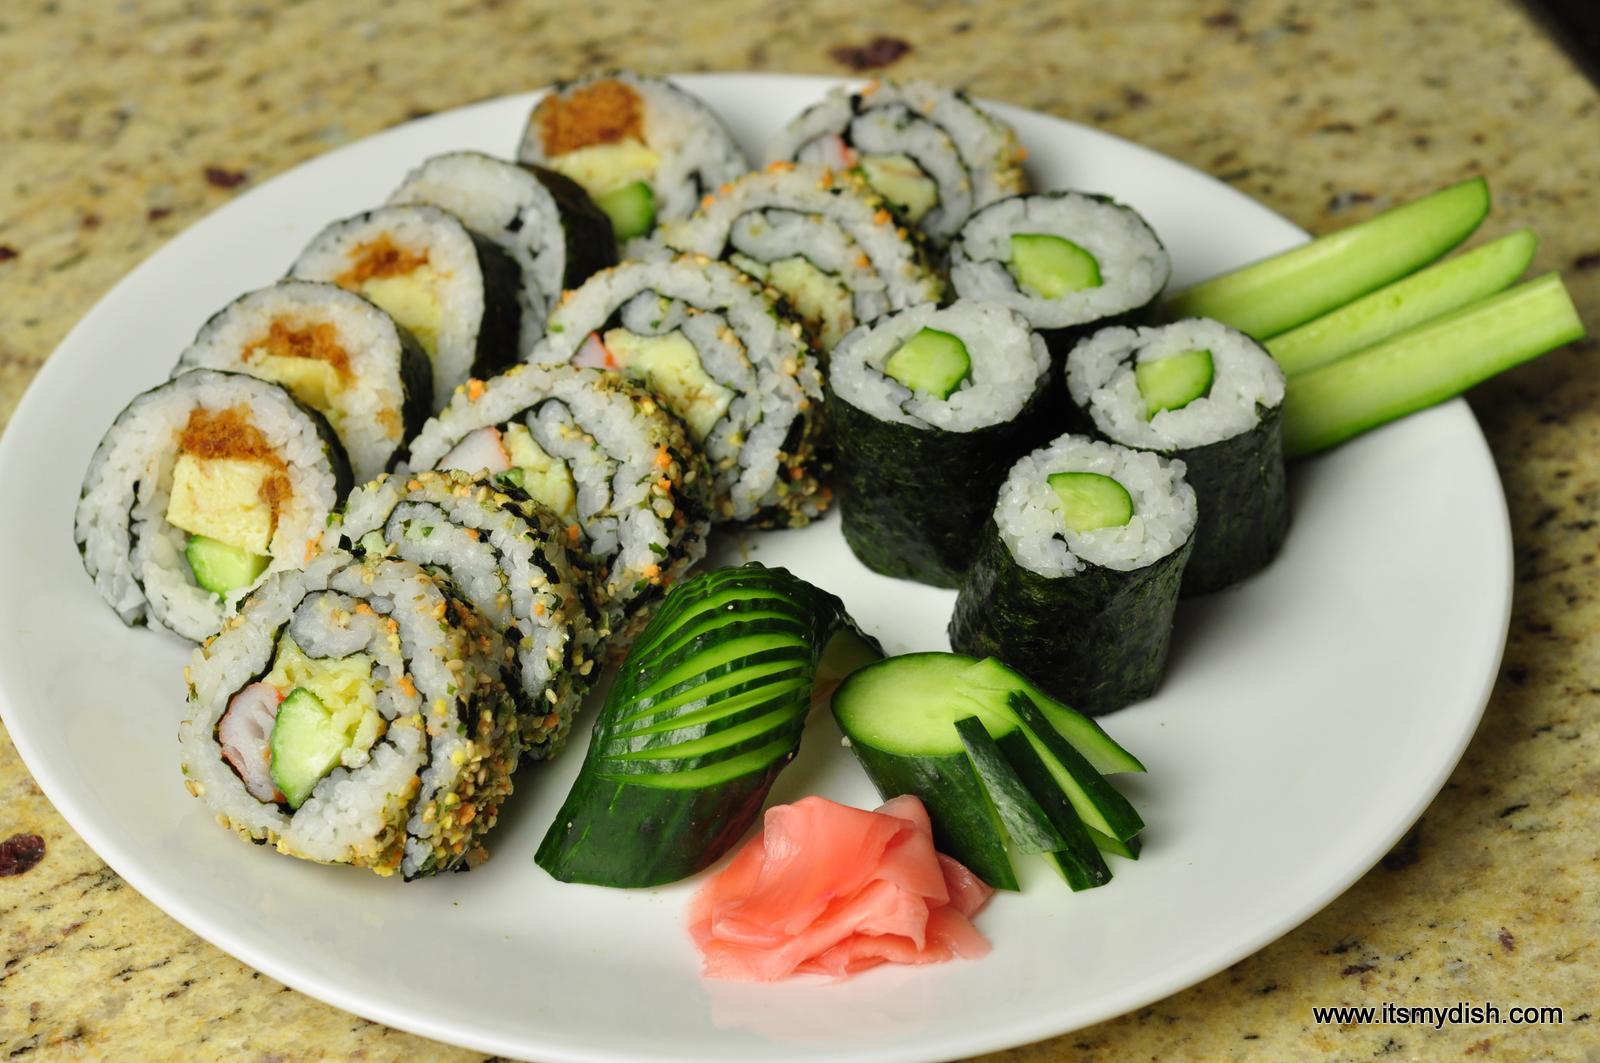 How to make sushi rolls